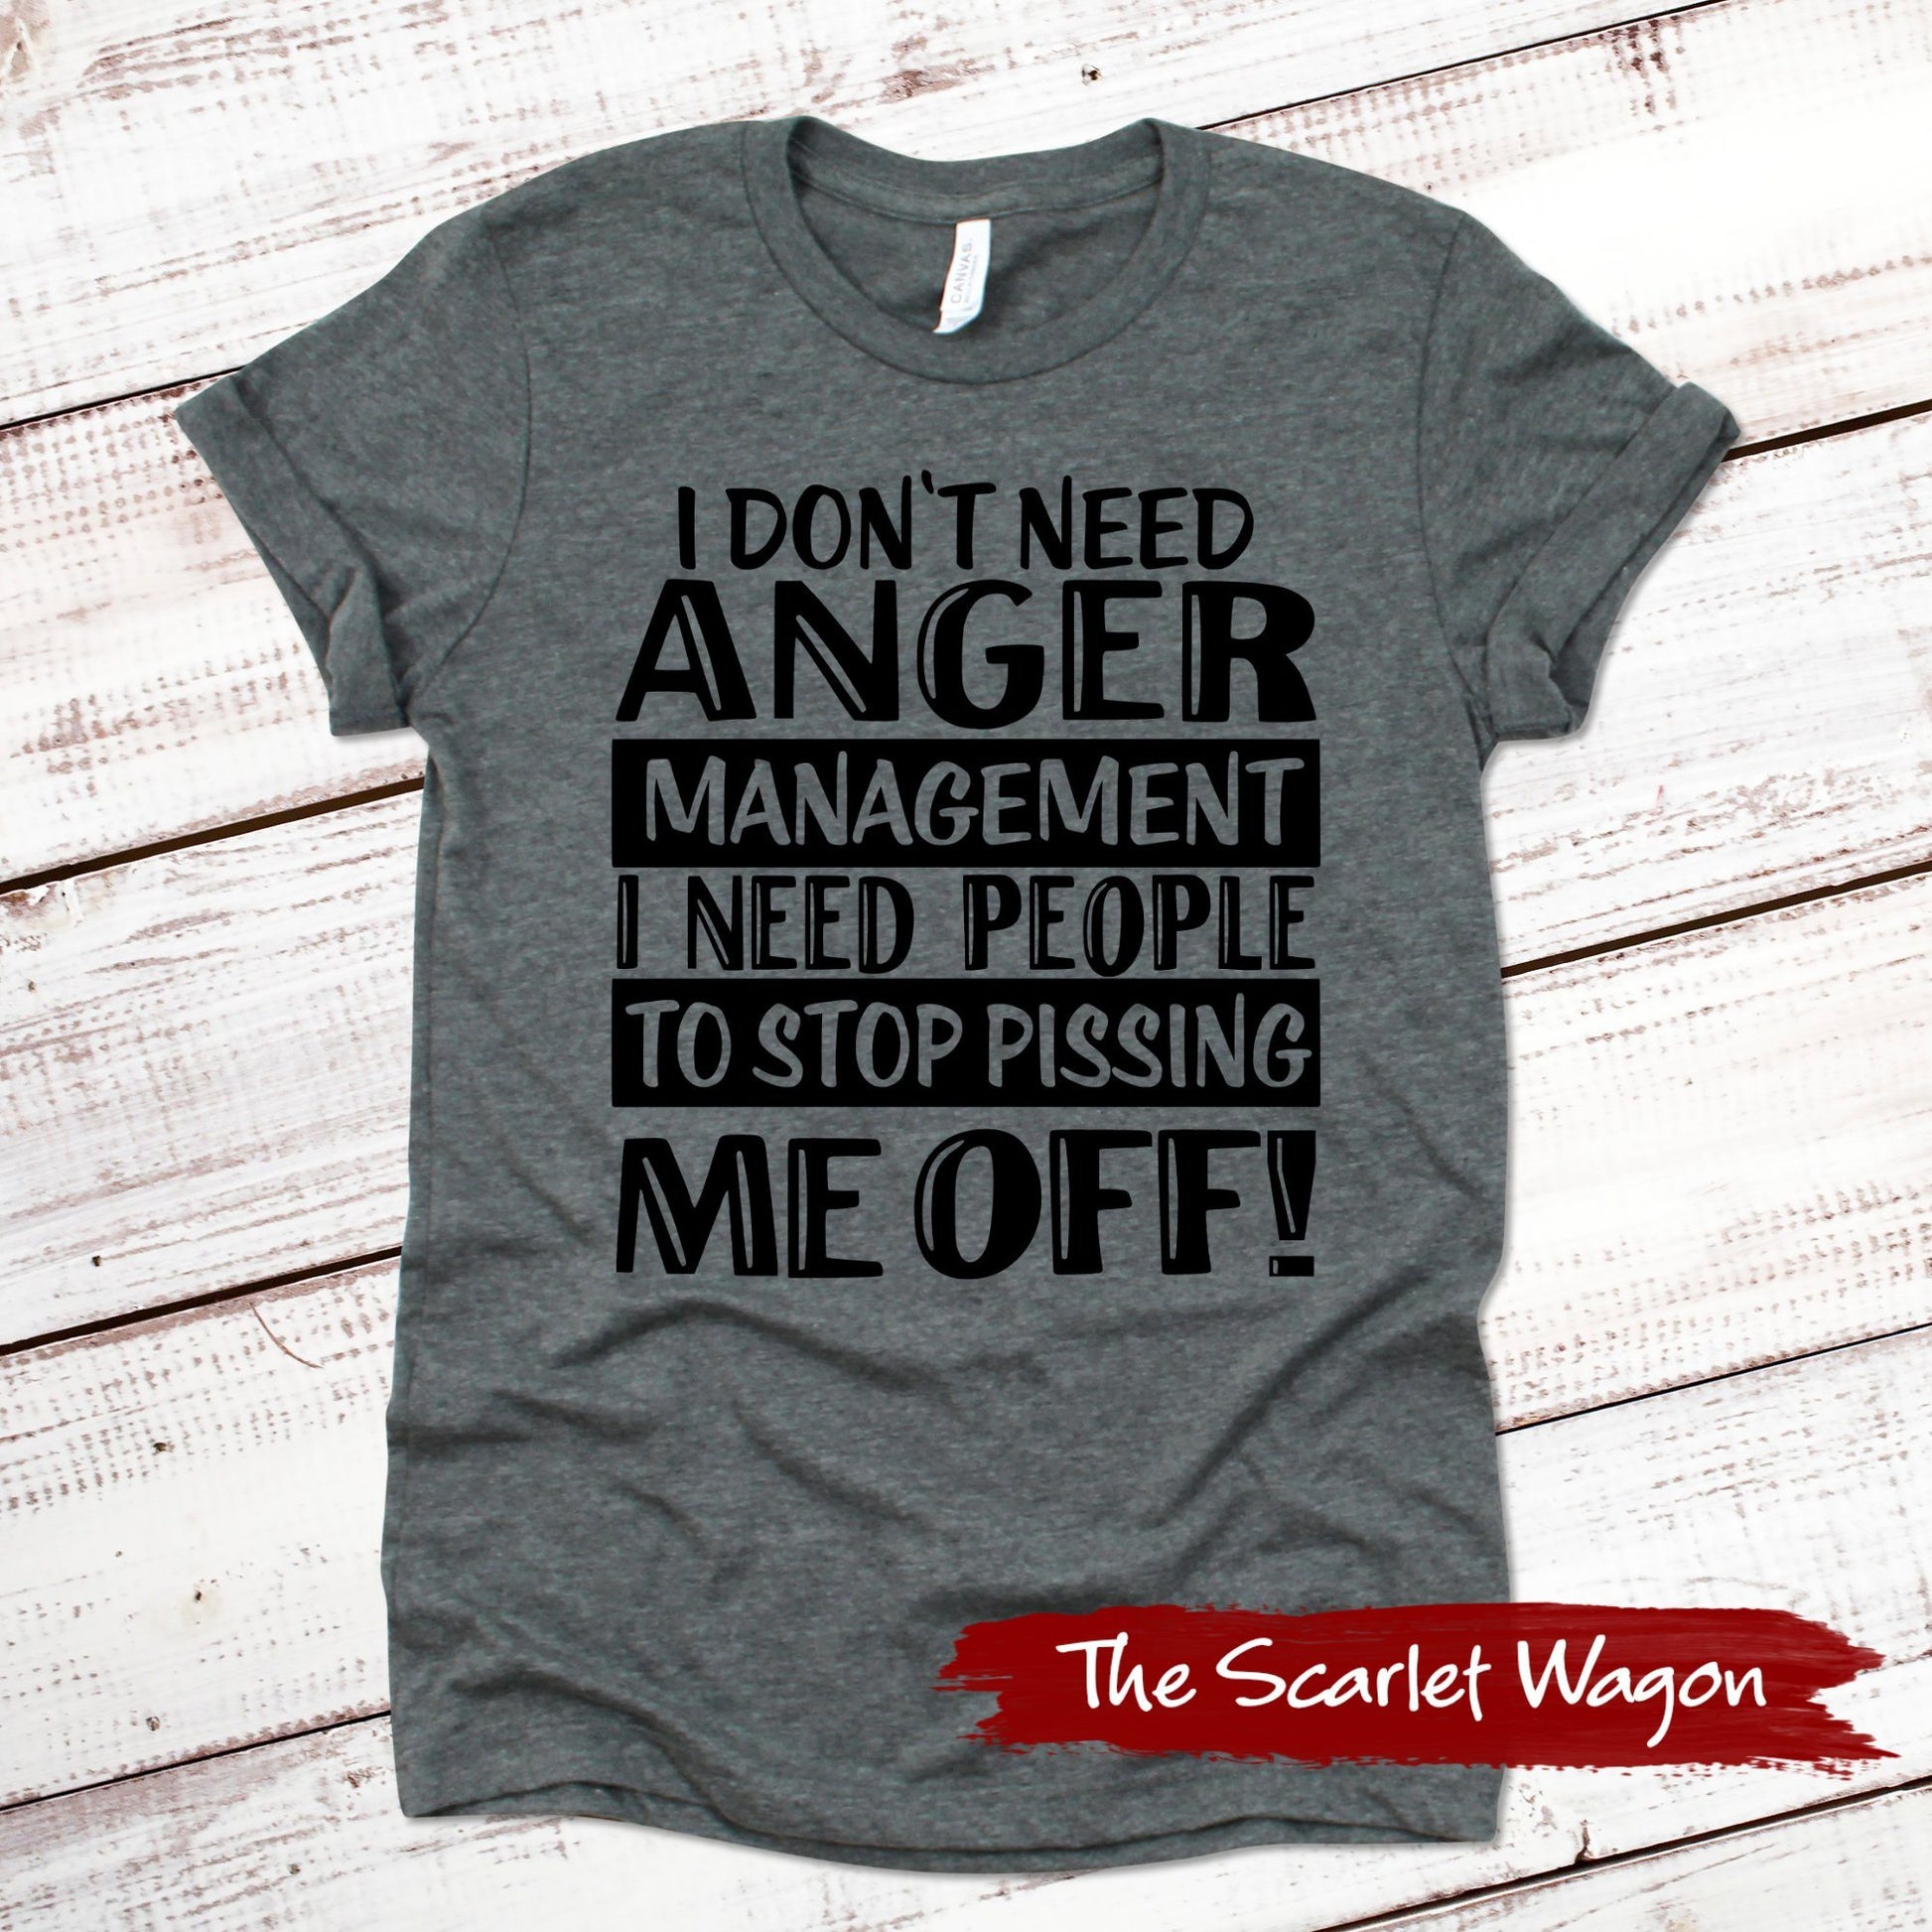 I Don't Need Anger Management Funny Shirt Scarlet Wagon Deep Heather Gray XS 